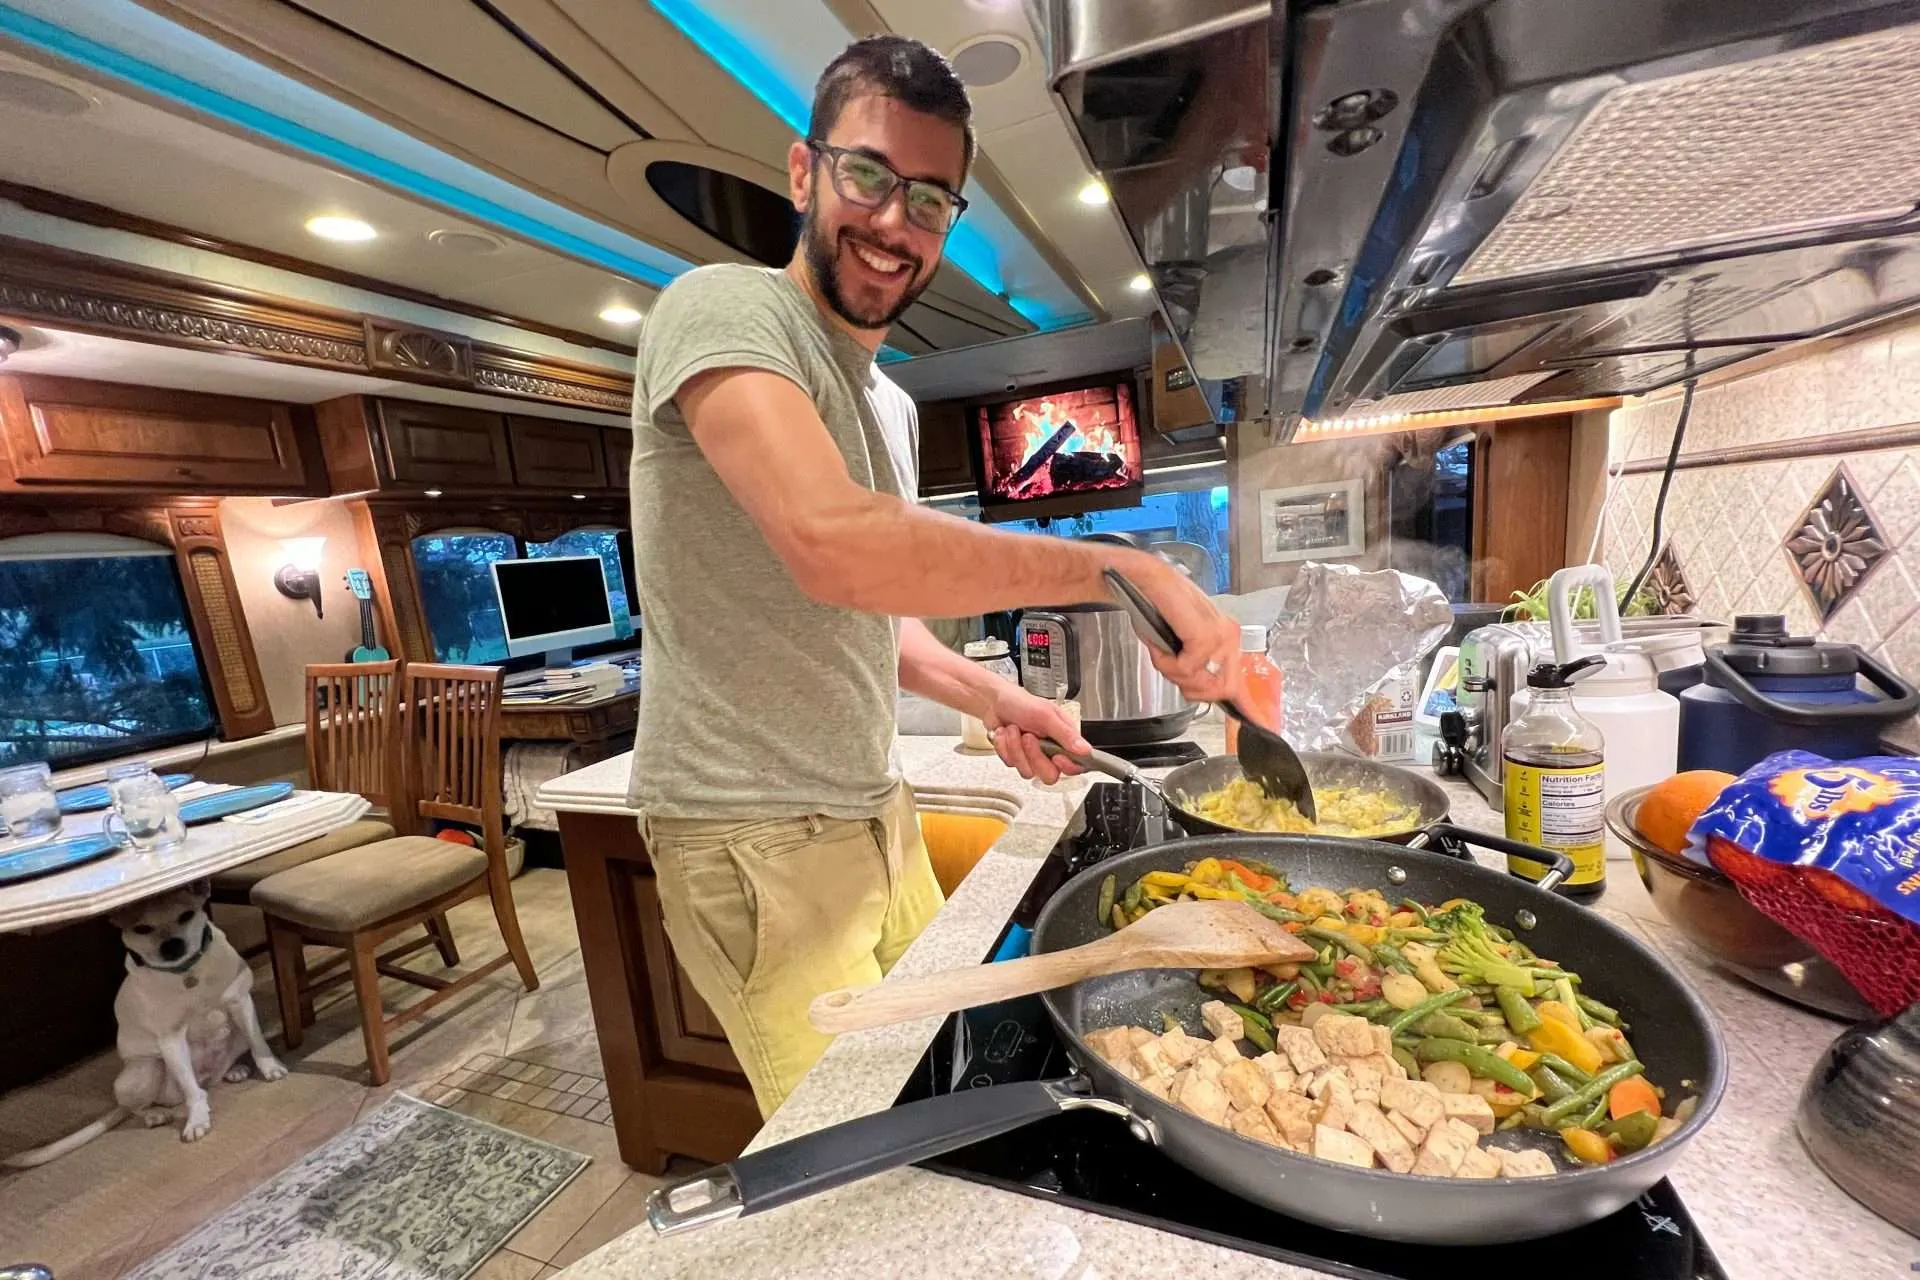 Tom Cooking a meal in the motorhome